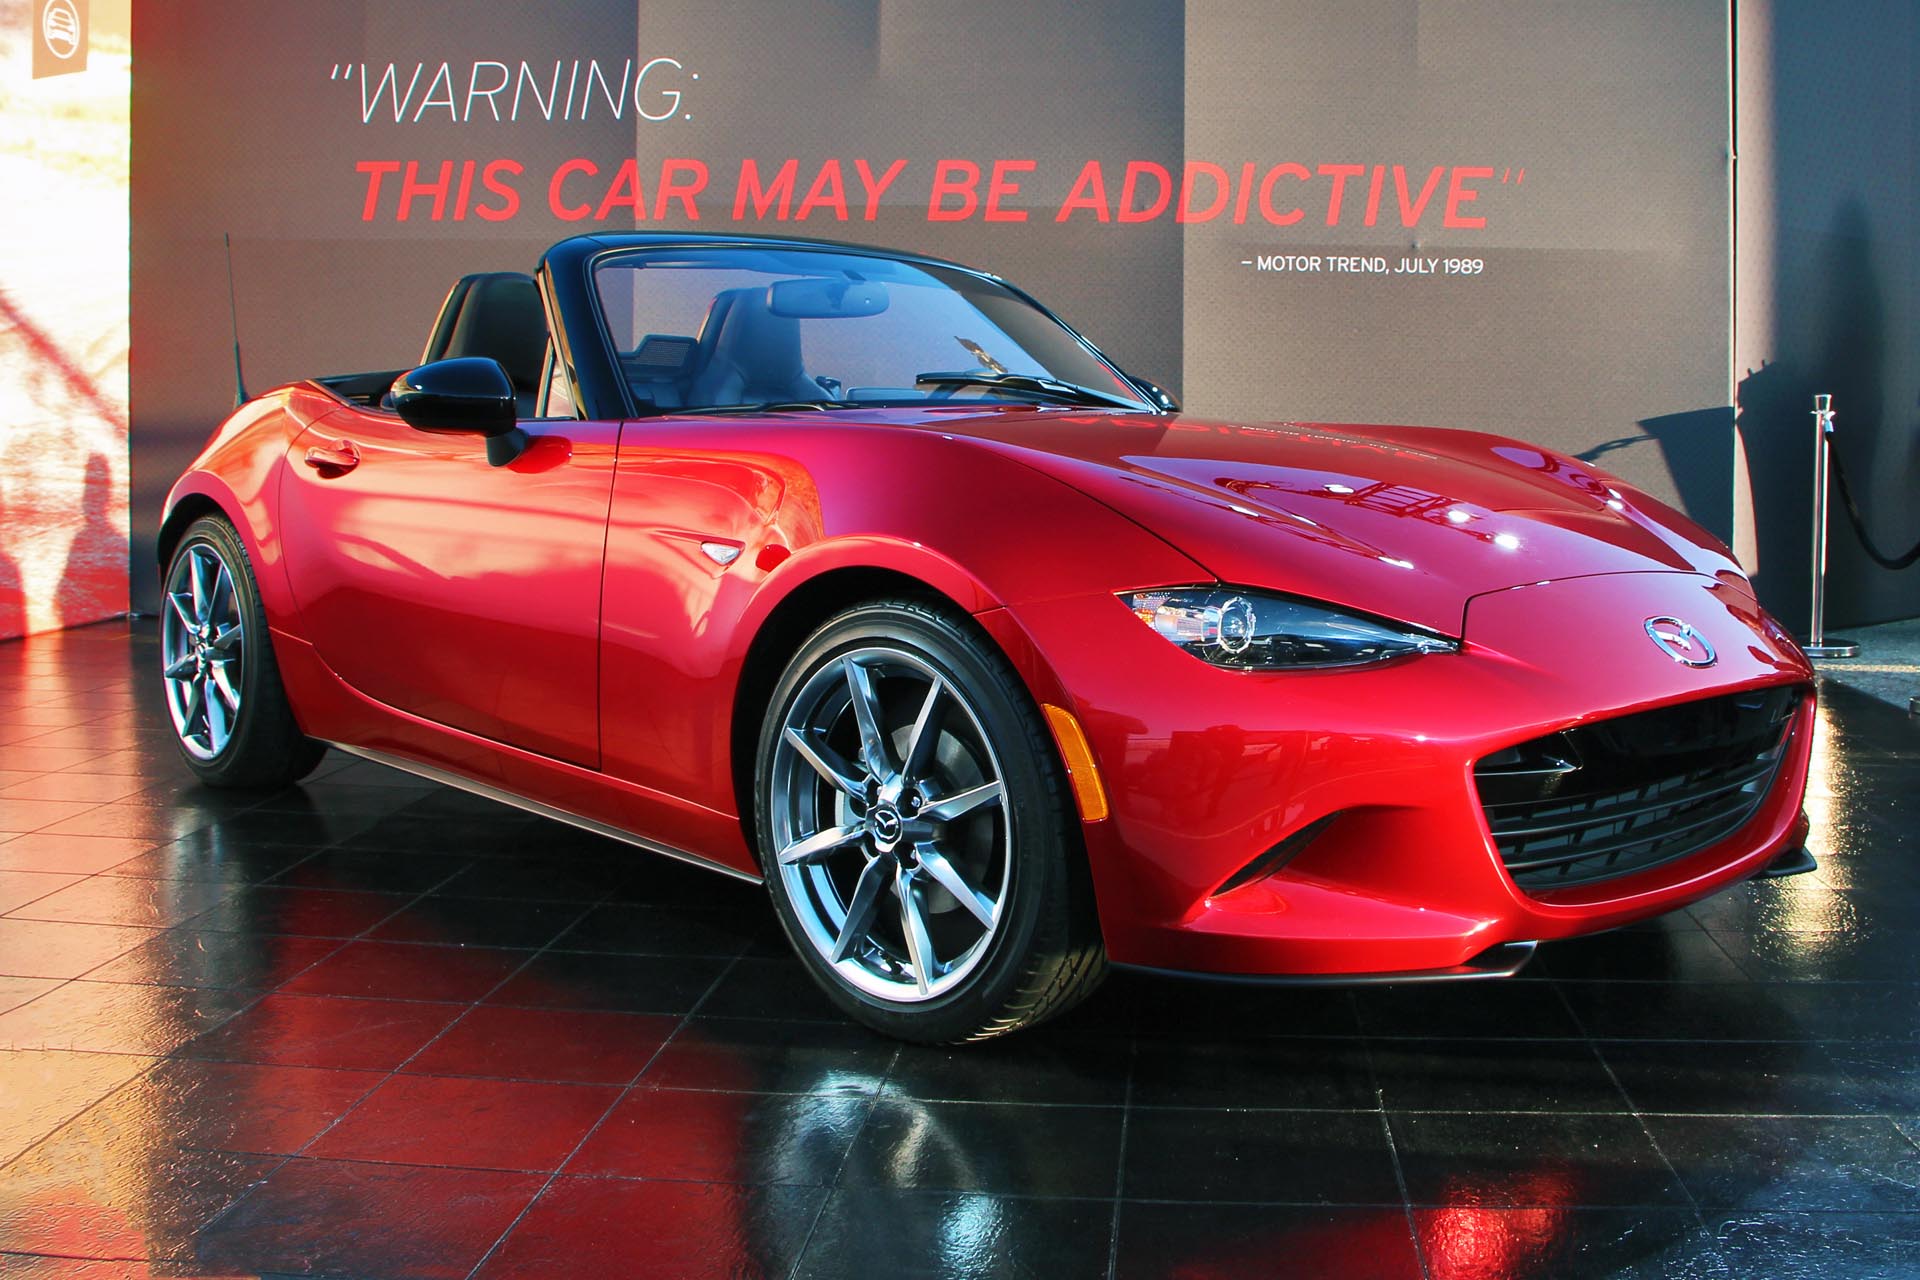 Ignore the haters. Talk to anyone who's actually driven a Mazda MX-5 (also known as the Miata) and they'll sing its praises. It's nimble, responsive, communicative – in short, the perfect driver's car. Need more rear visibility? Put the roof down. Of course, it's a two-seat convertible in a crossover/SUV world so highway driving can be a bit intimidating if you find yourself trapped between a tractor-trailer and a Cadillac Escalade.